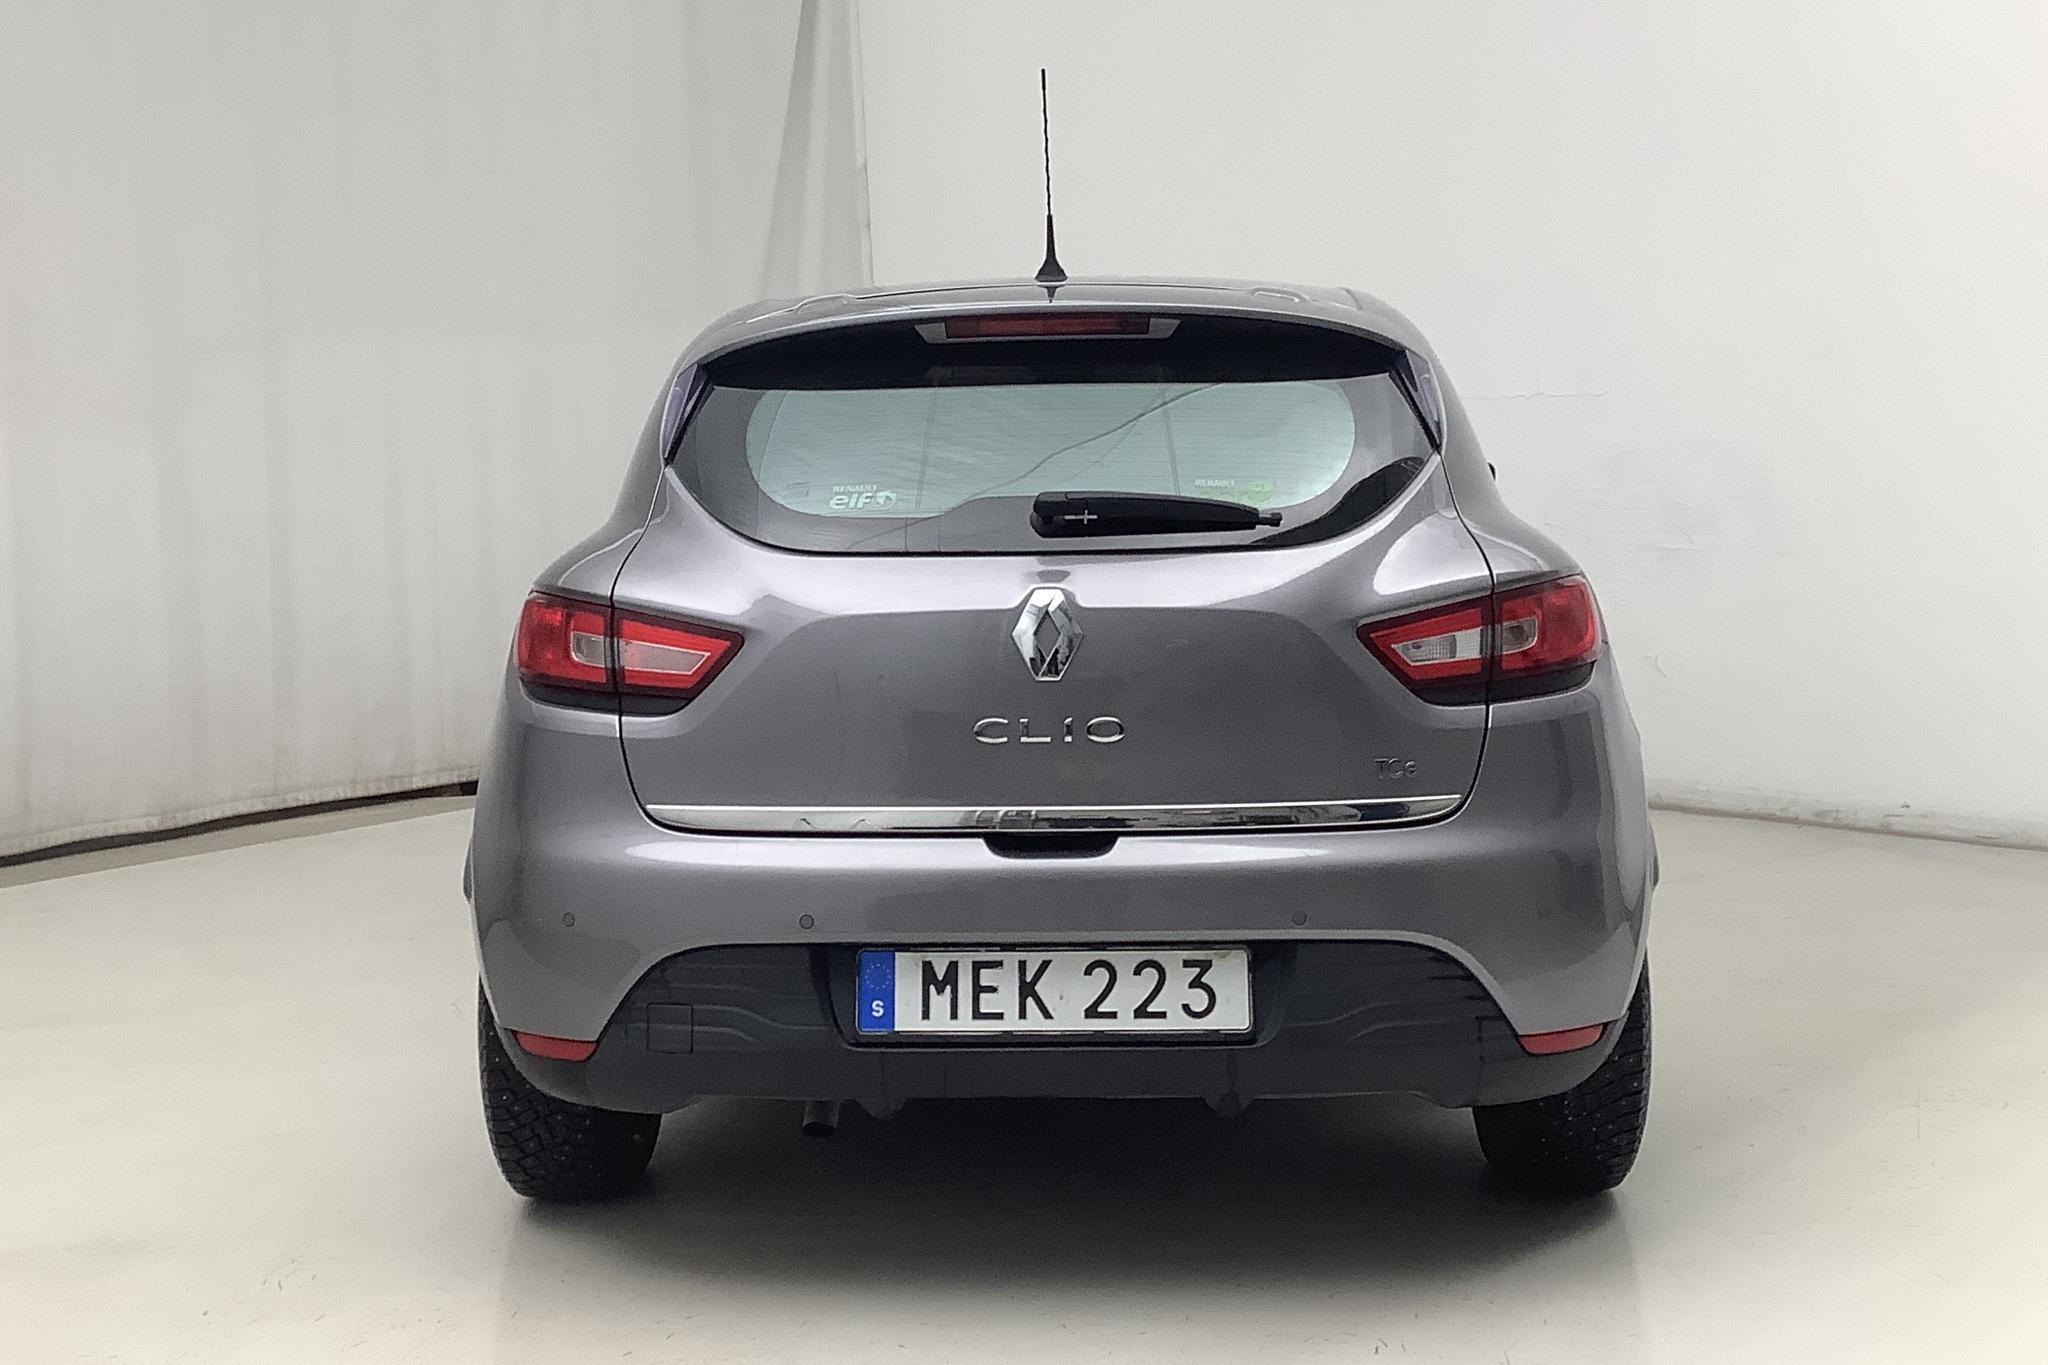 Renault Clio IV 0.9 TCe 90 5dr (90hk) - 78 460 km - Manual - gray - 2016